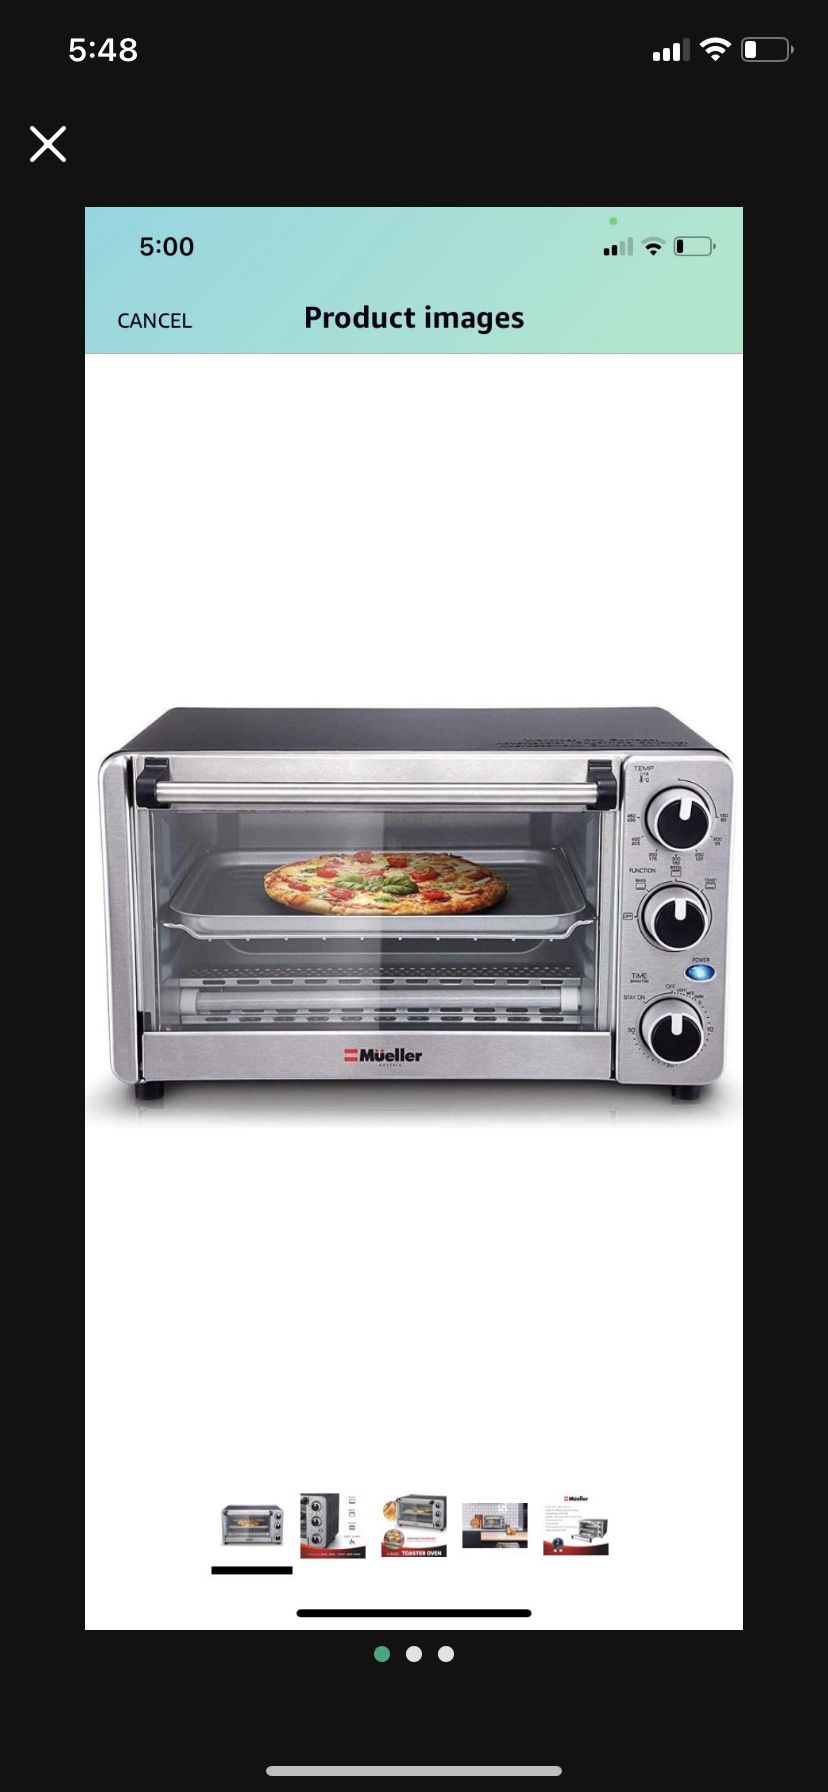 Mueller Austria Toaster Oven 4 Slice, Multi-function Stainless Steel Finish  with Timer - Toast - Bake - Broil Settings, Natural Convection - 1100 Watts  of Power, Includes Baking Pan and Rack